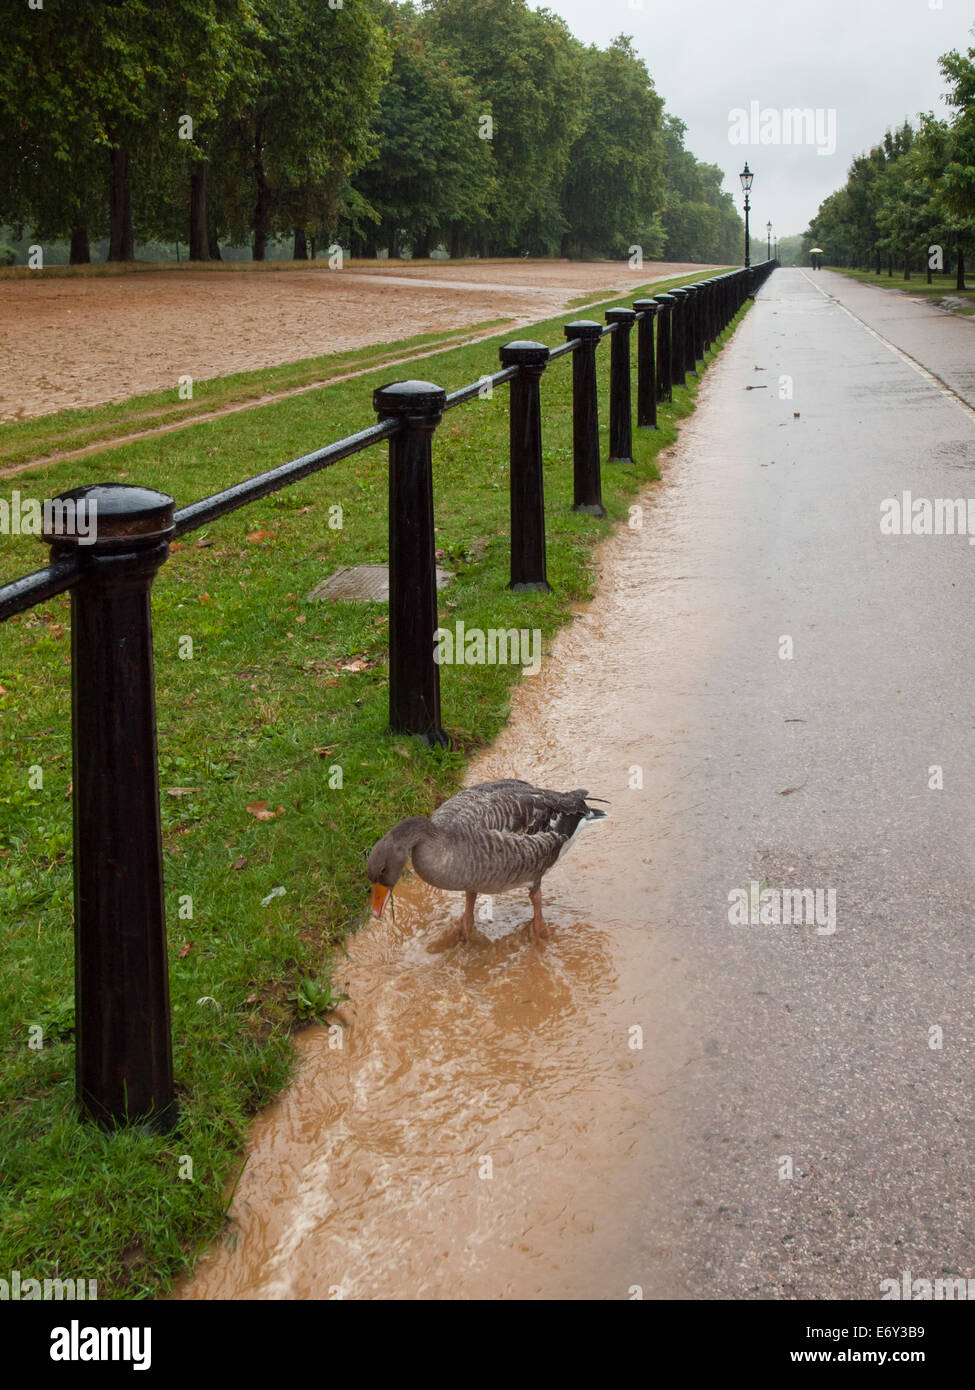 Goose feeding in run off during torrential rain storm on cycle path next to rotten row hyde park. Wet British Summer. Stock Photo